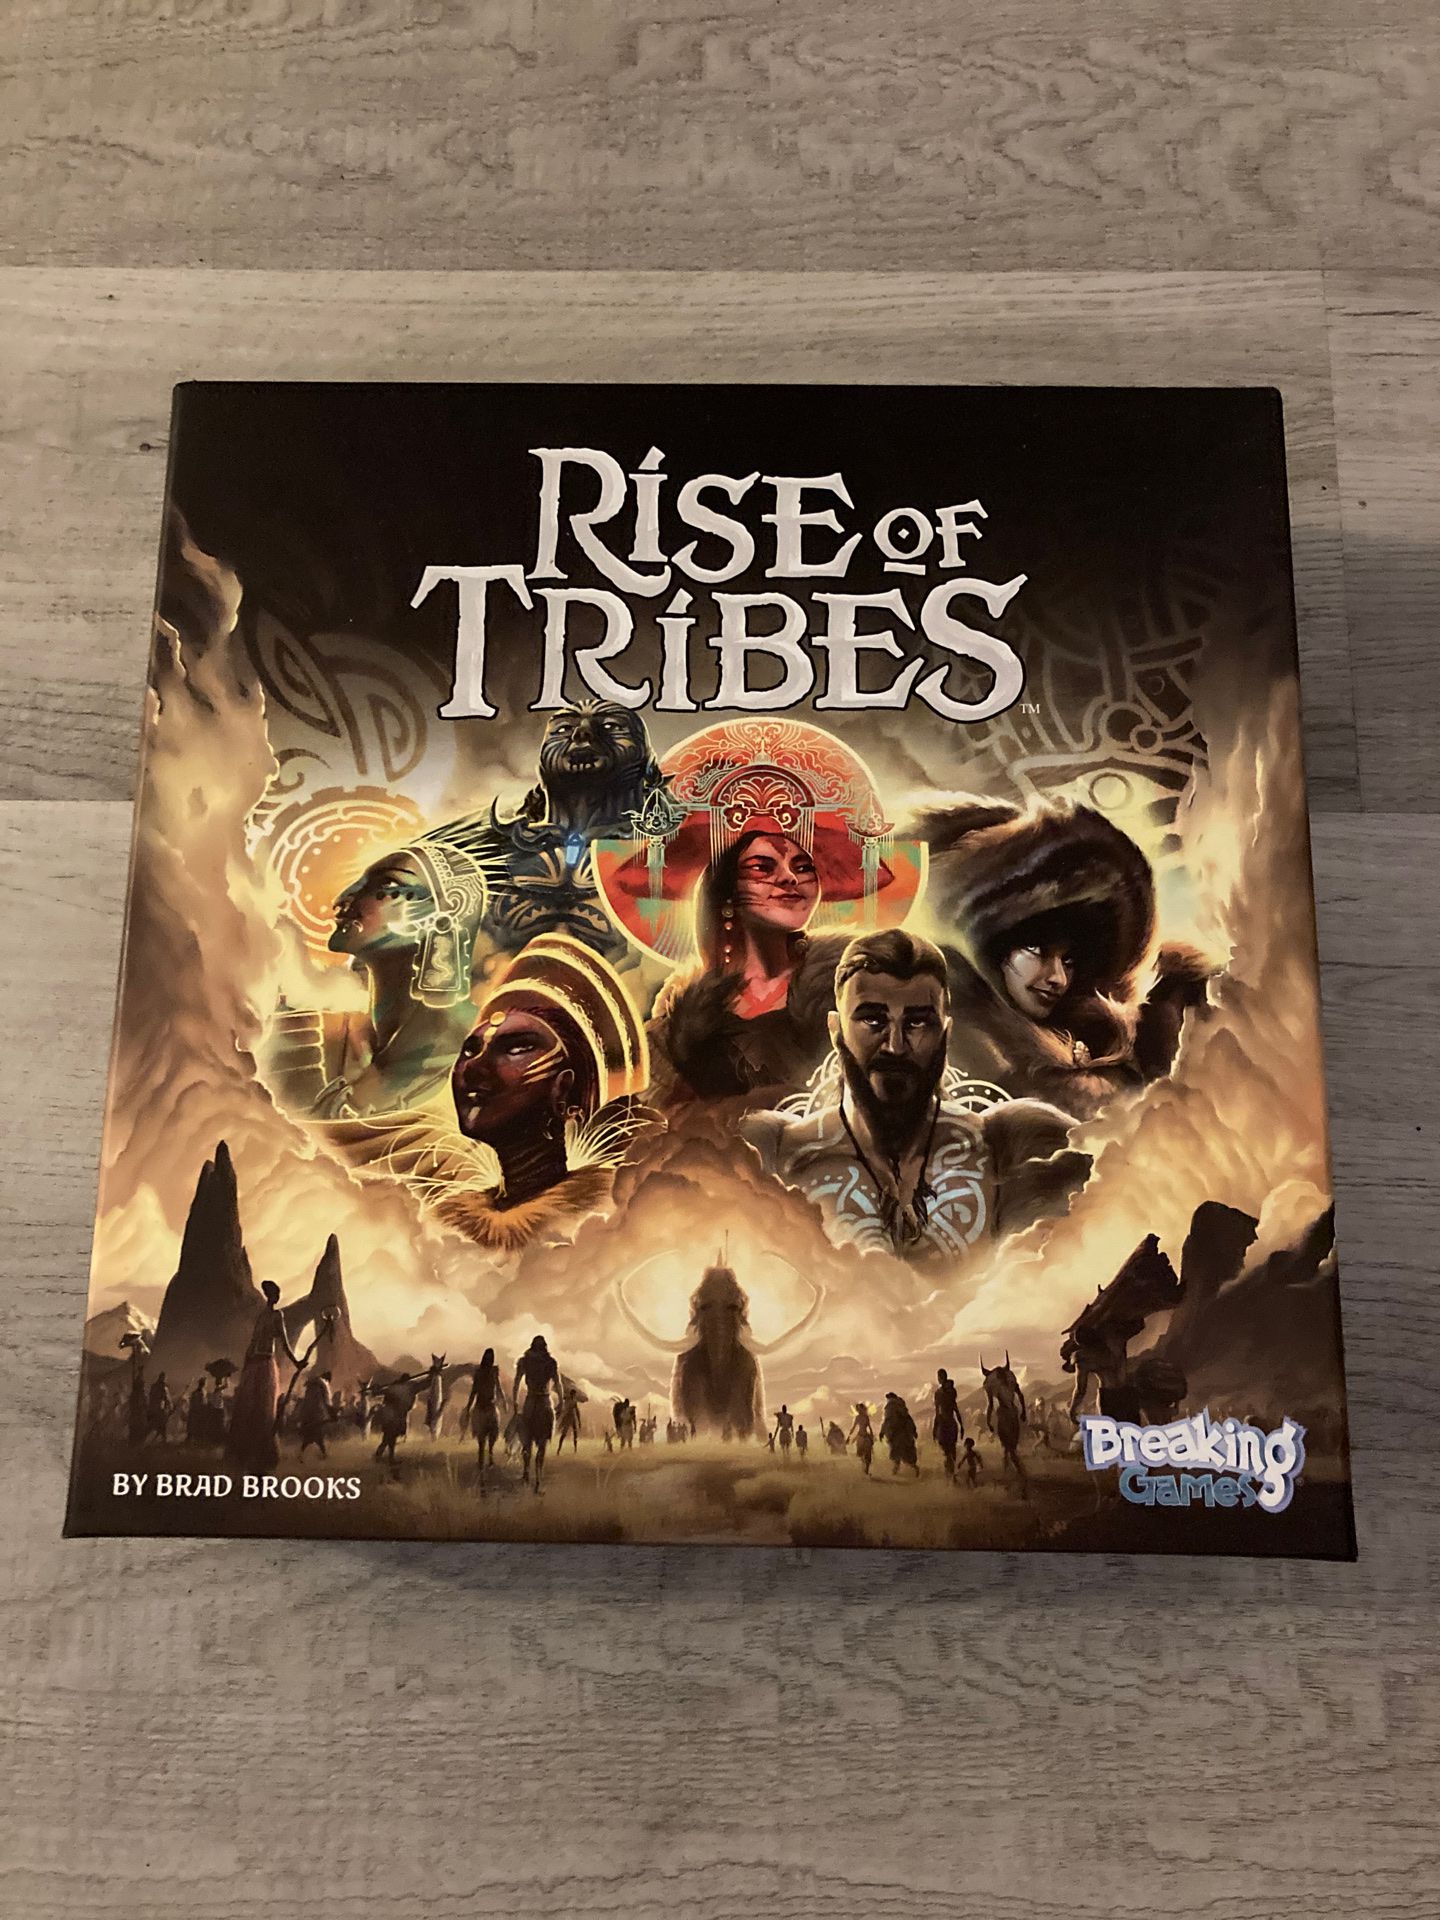 Rise of tribes is a bord game that is vary fun and easy to past time in the house or just to play